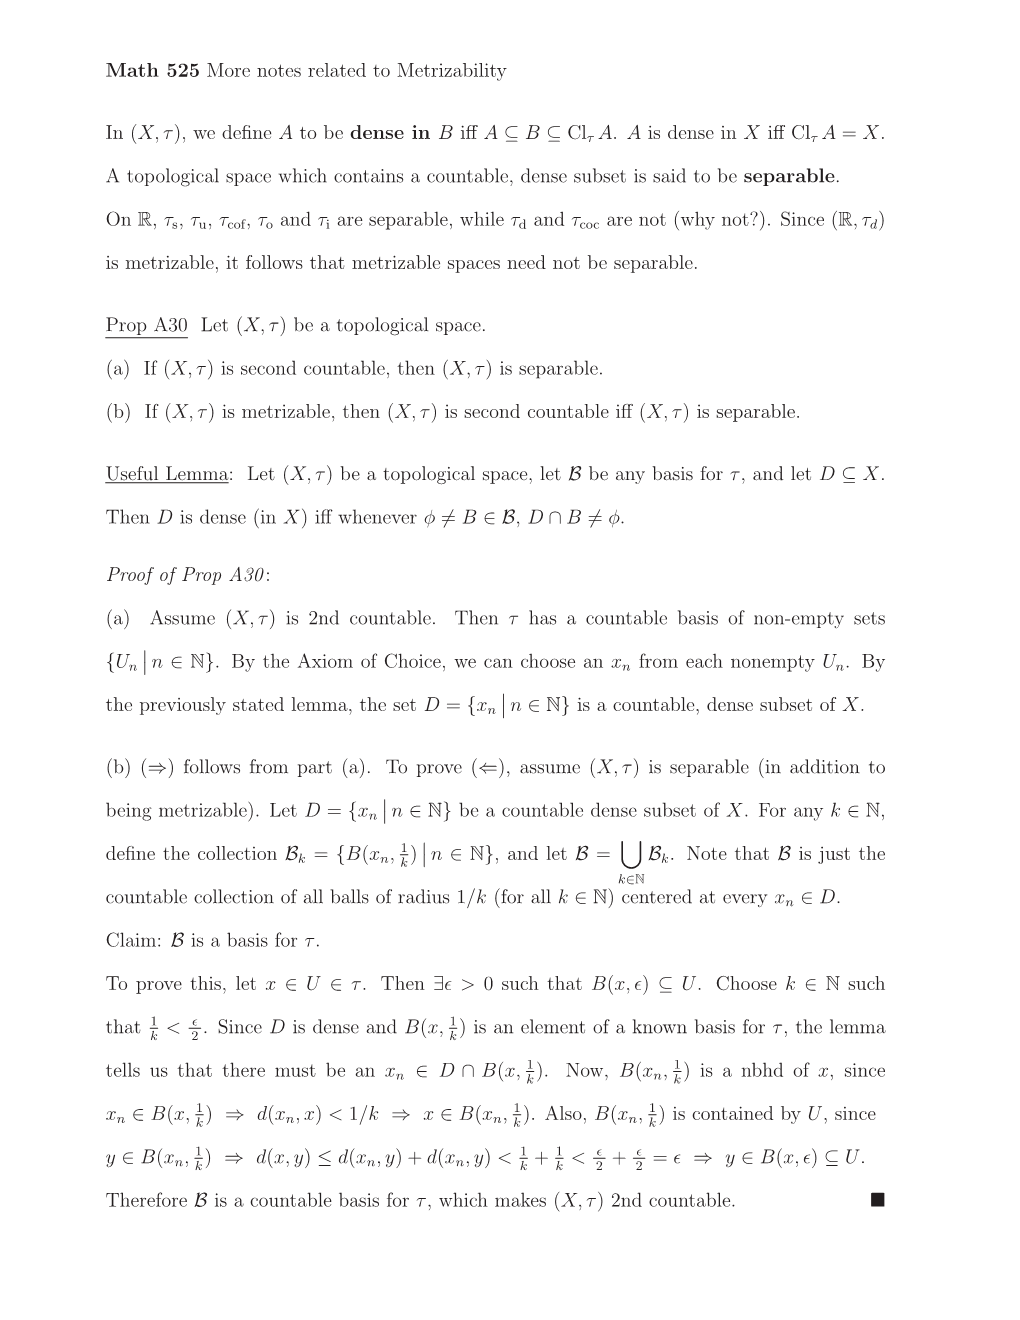 Math 525 More Notes Related to Metrizability in (X, Τ), We Define a To